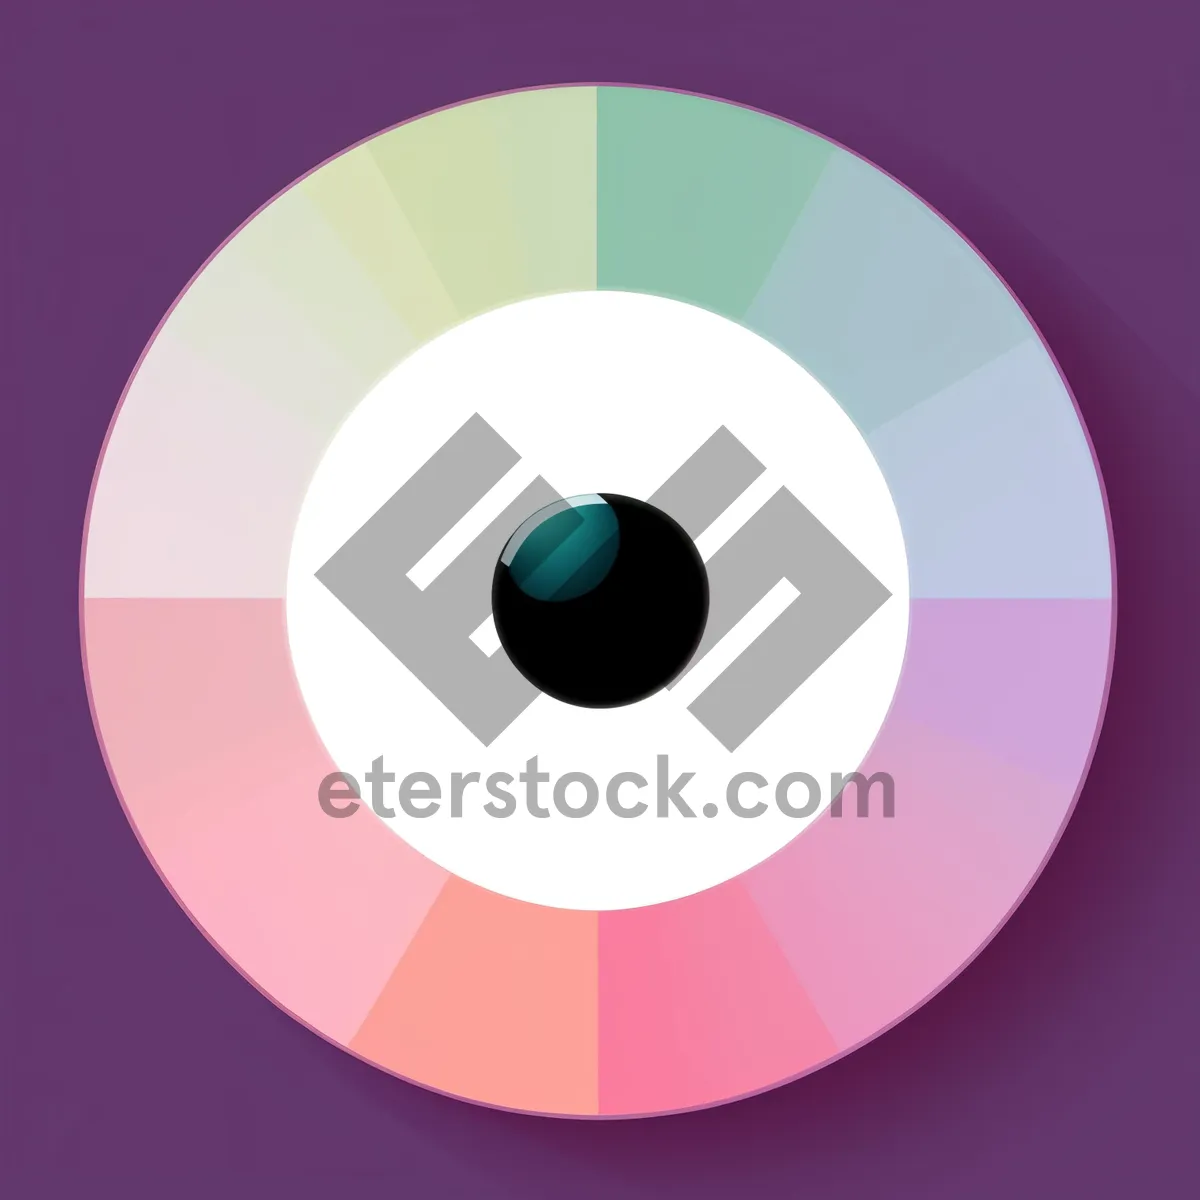 Picture of Shiny Round Web Buttons: A Bright, Glossy Button Set